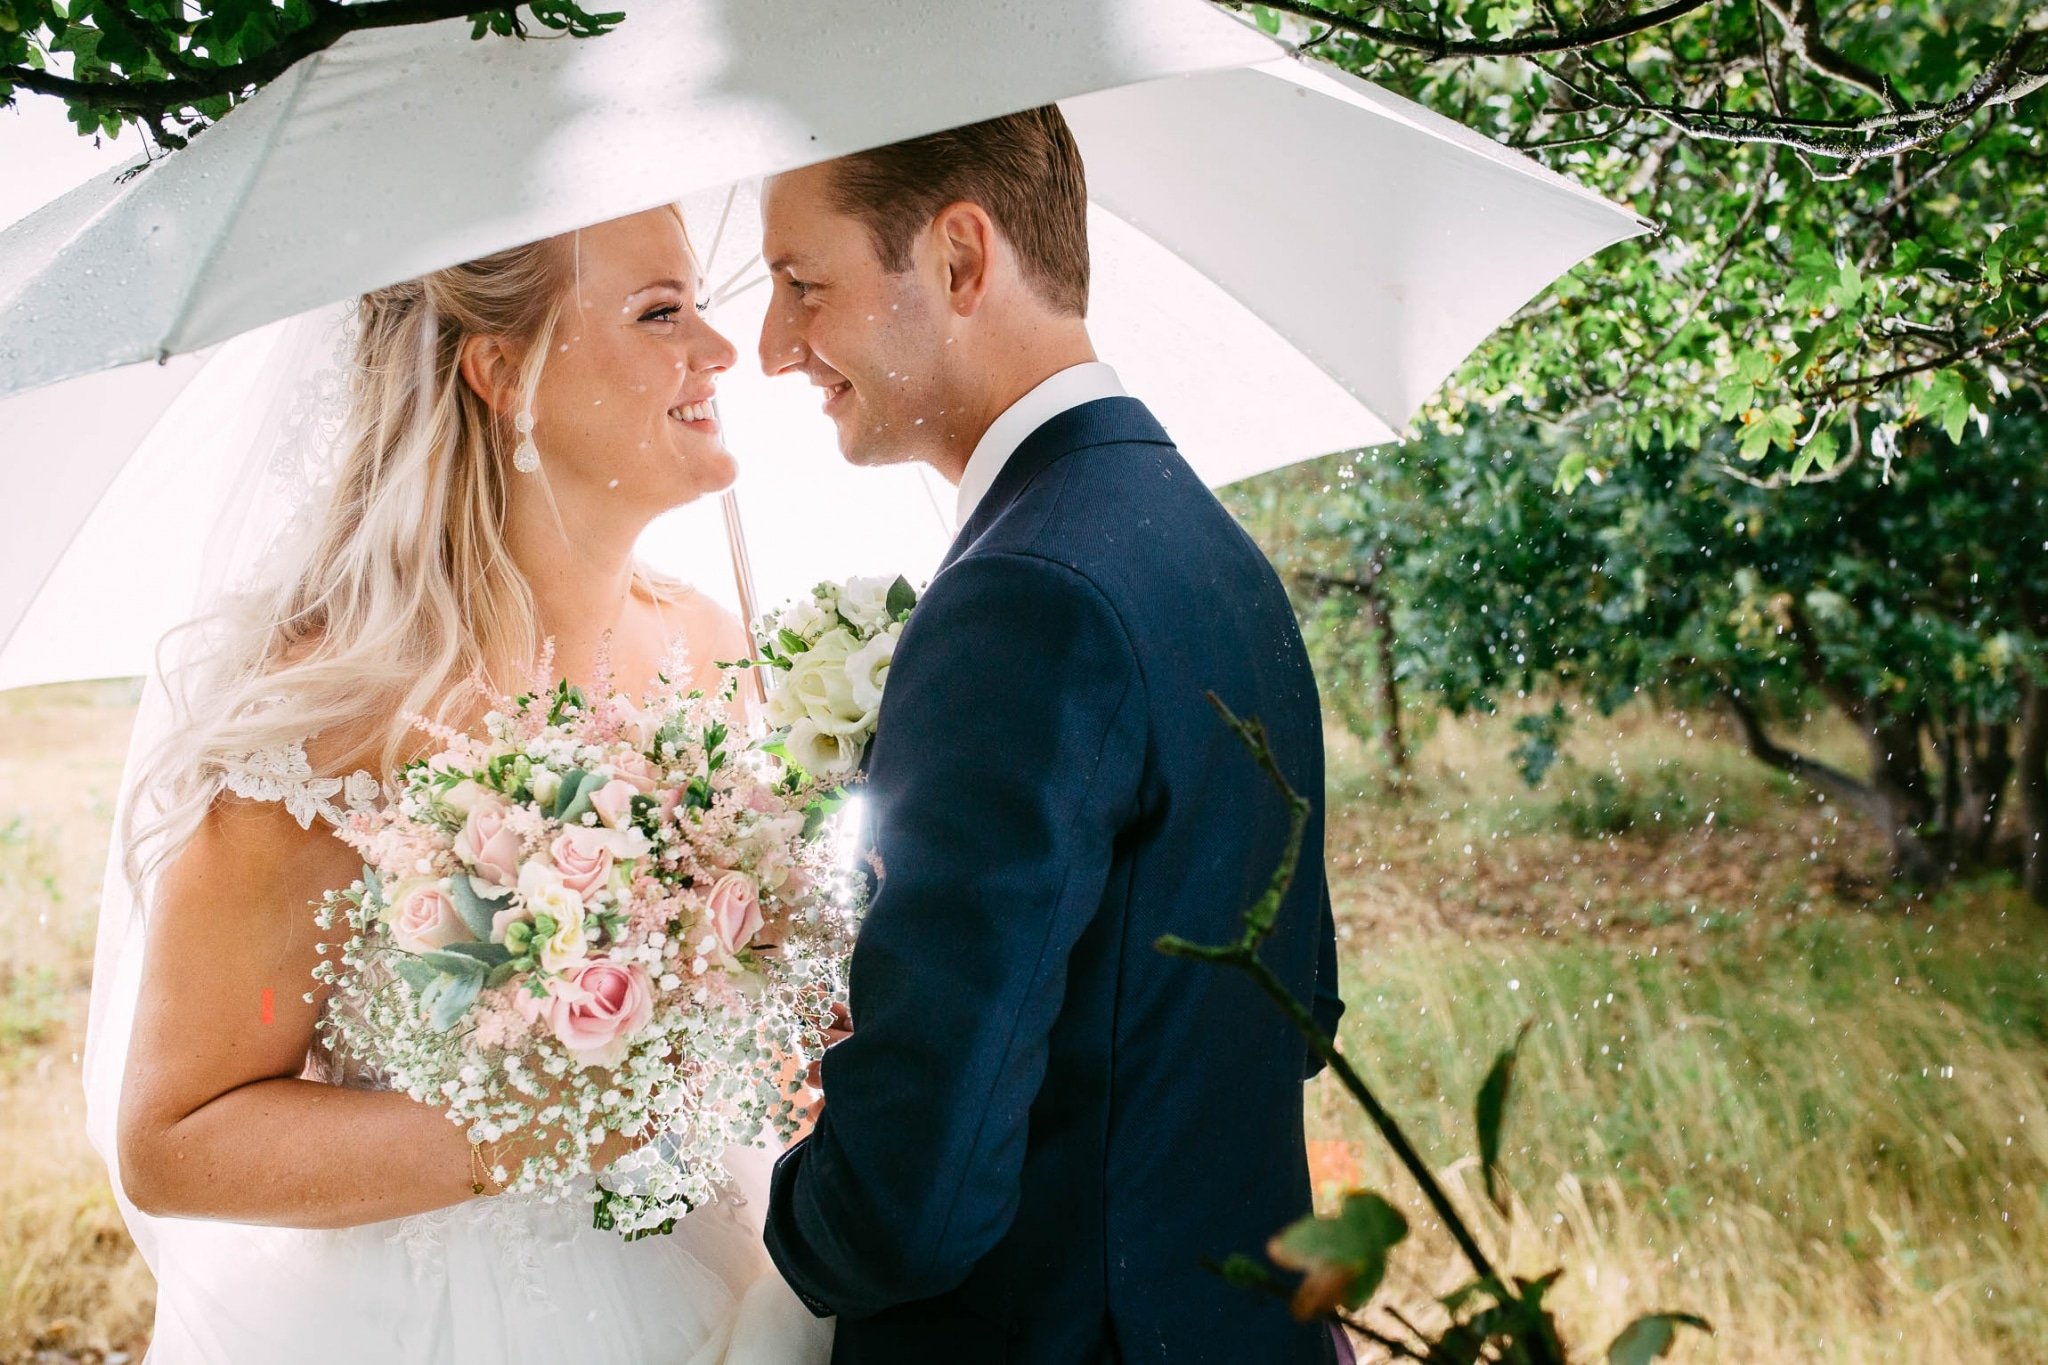 A bride and groom stand under an umbrella.